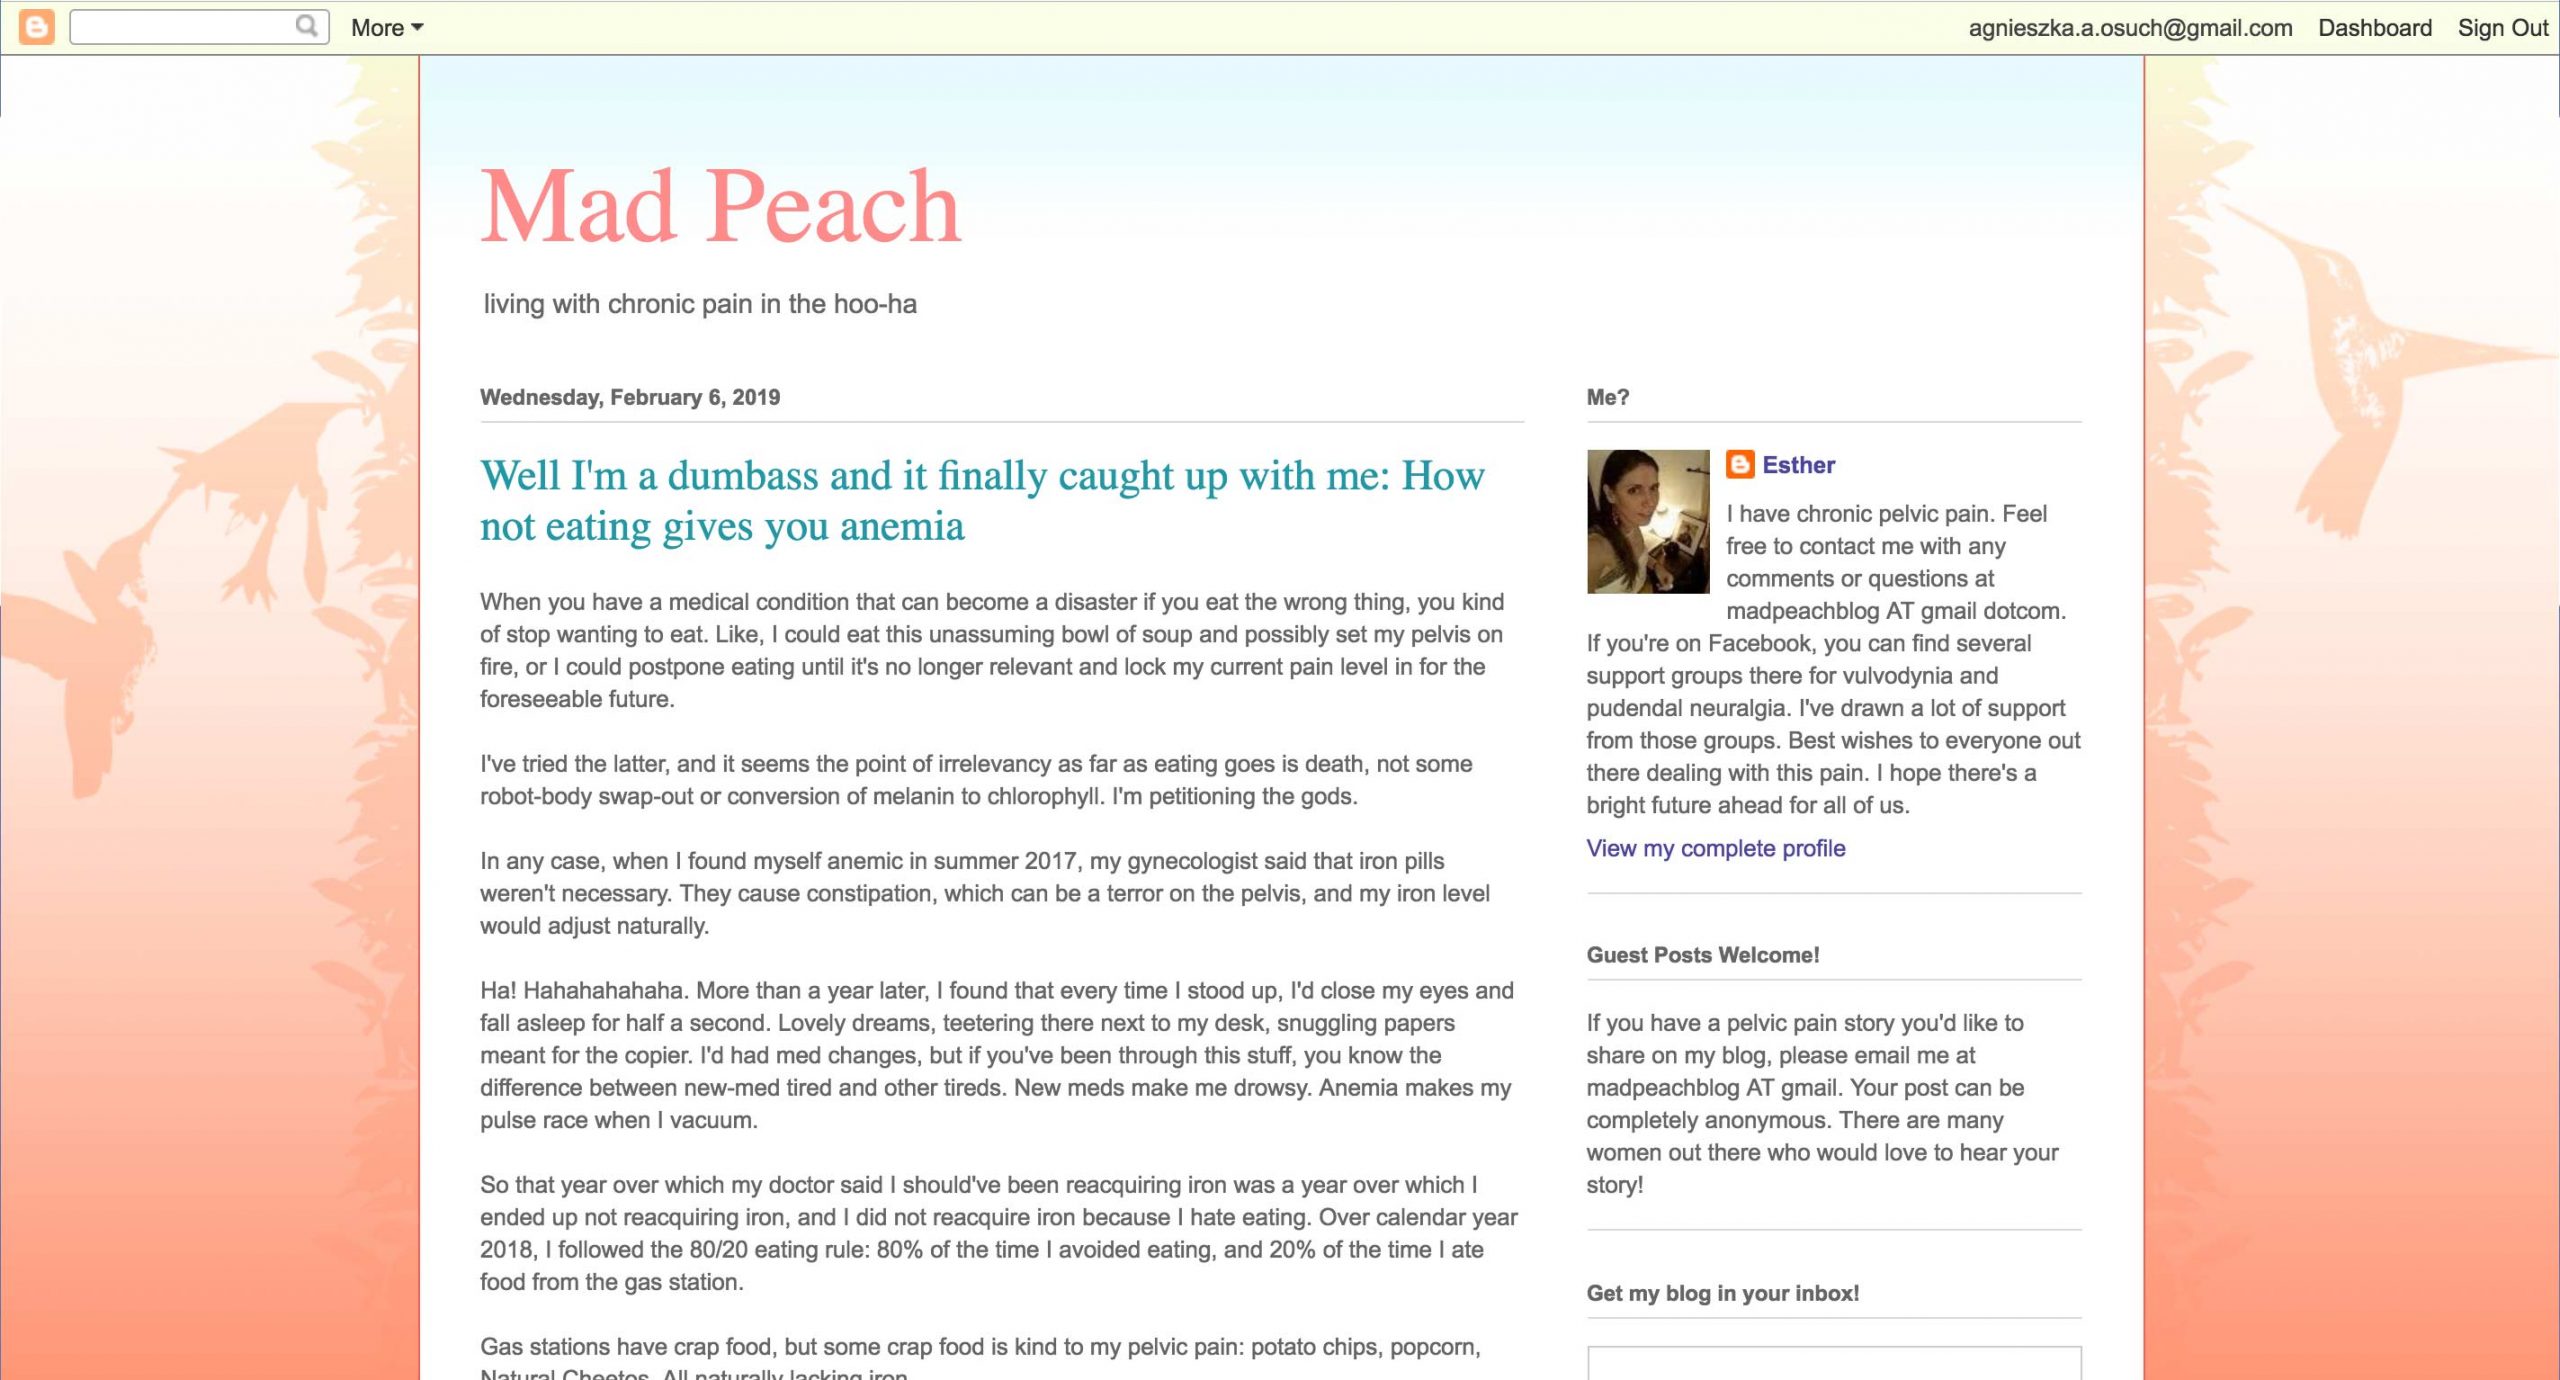 Mad Peach - blog about living with vulvodynia